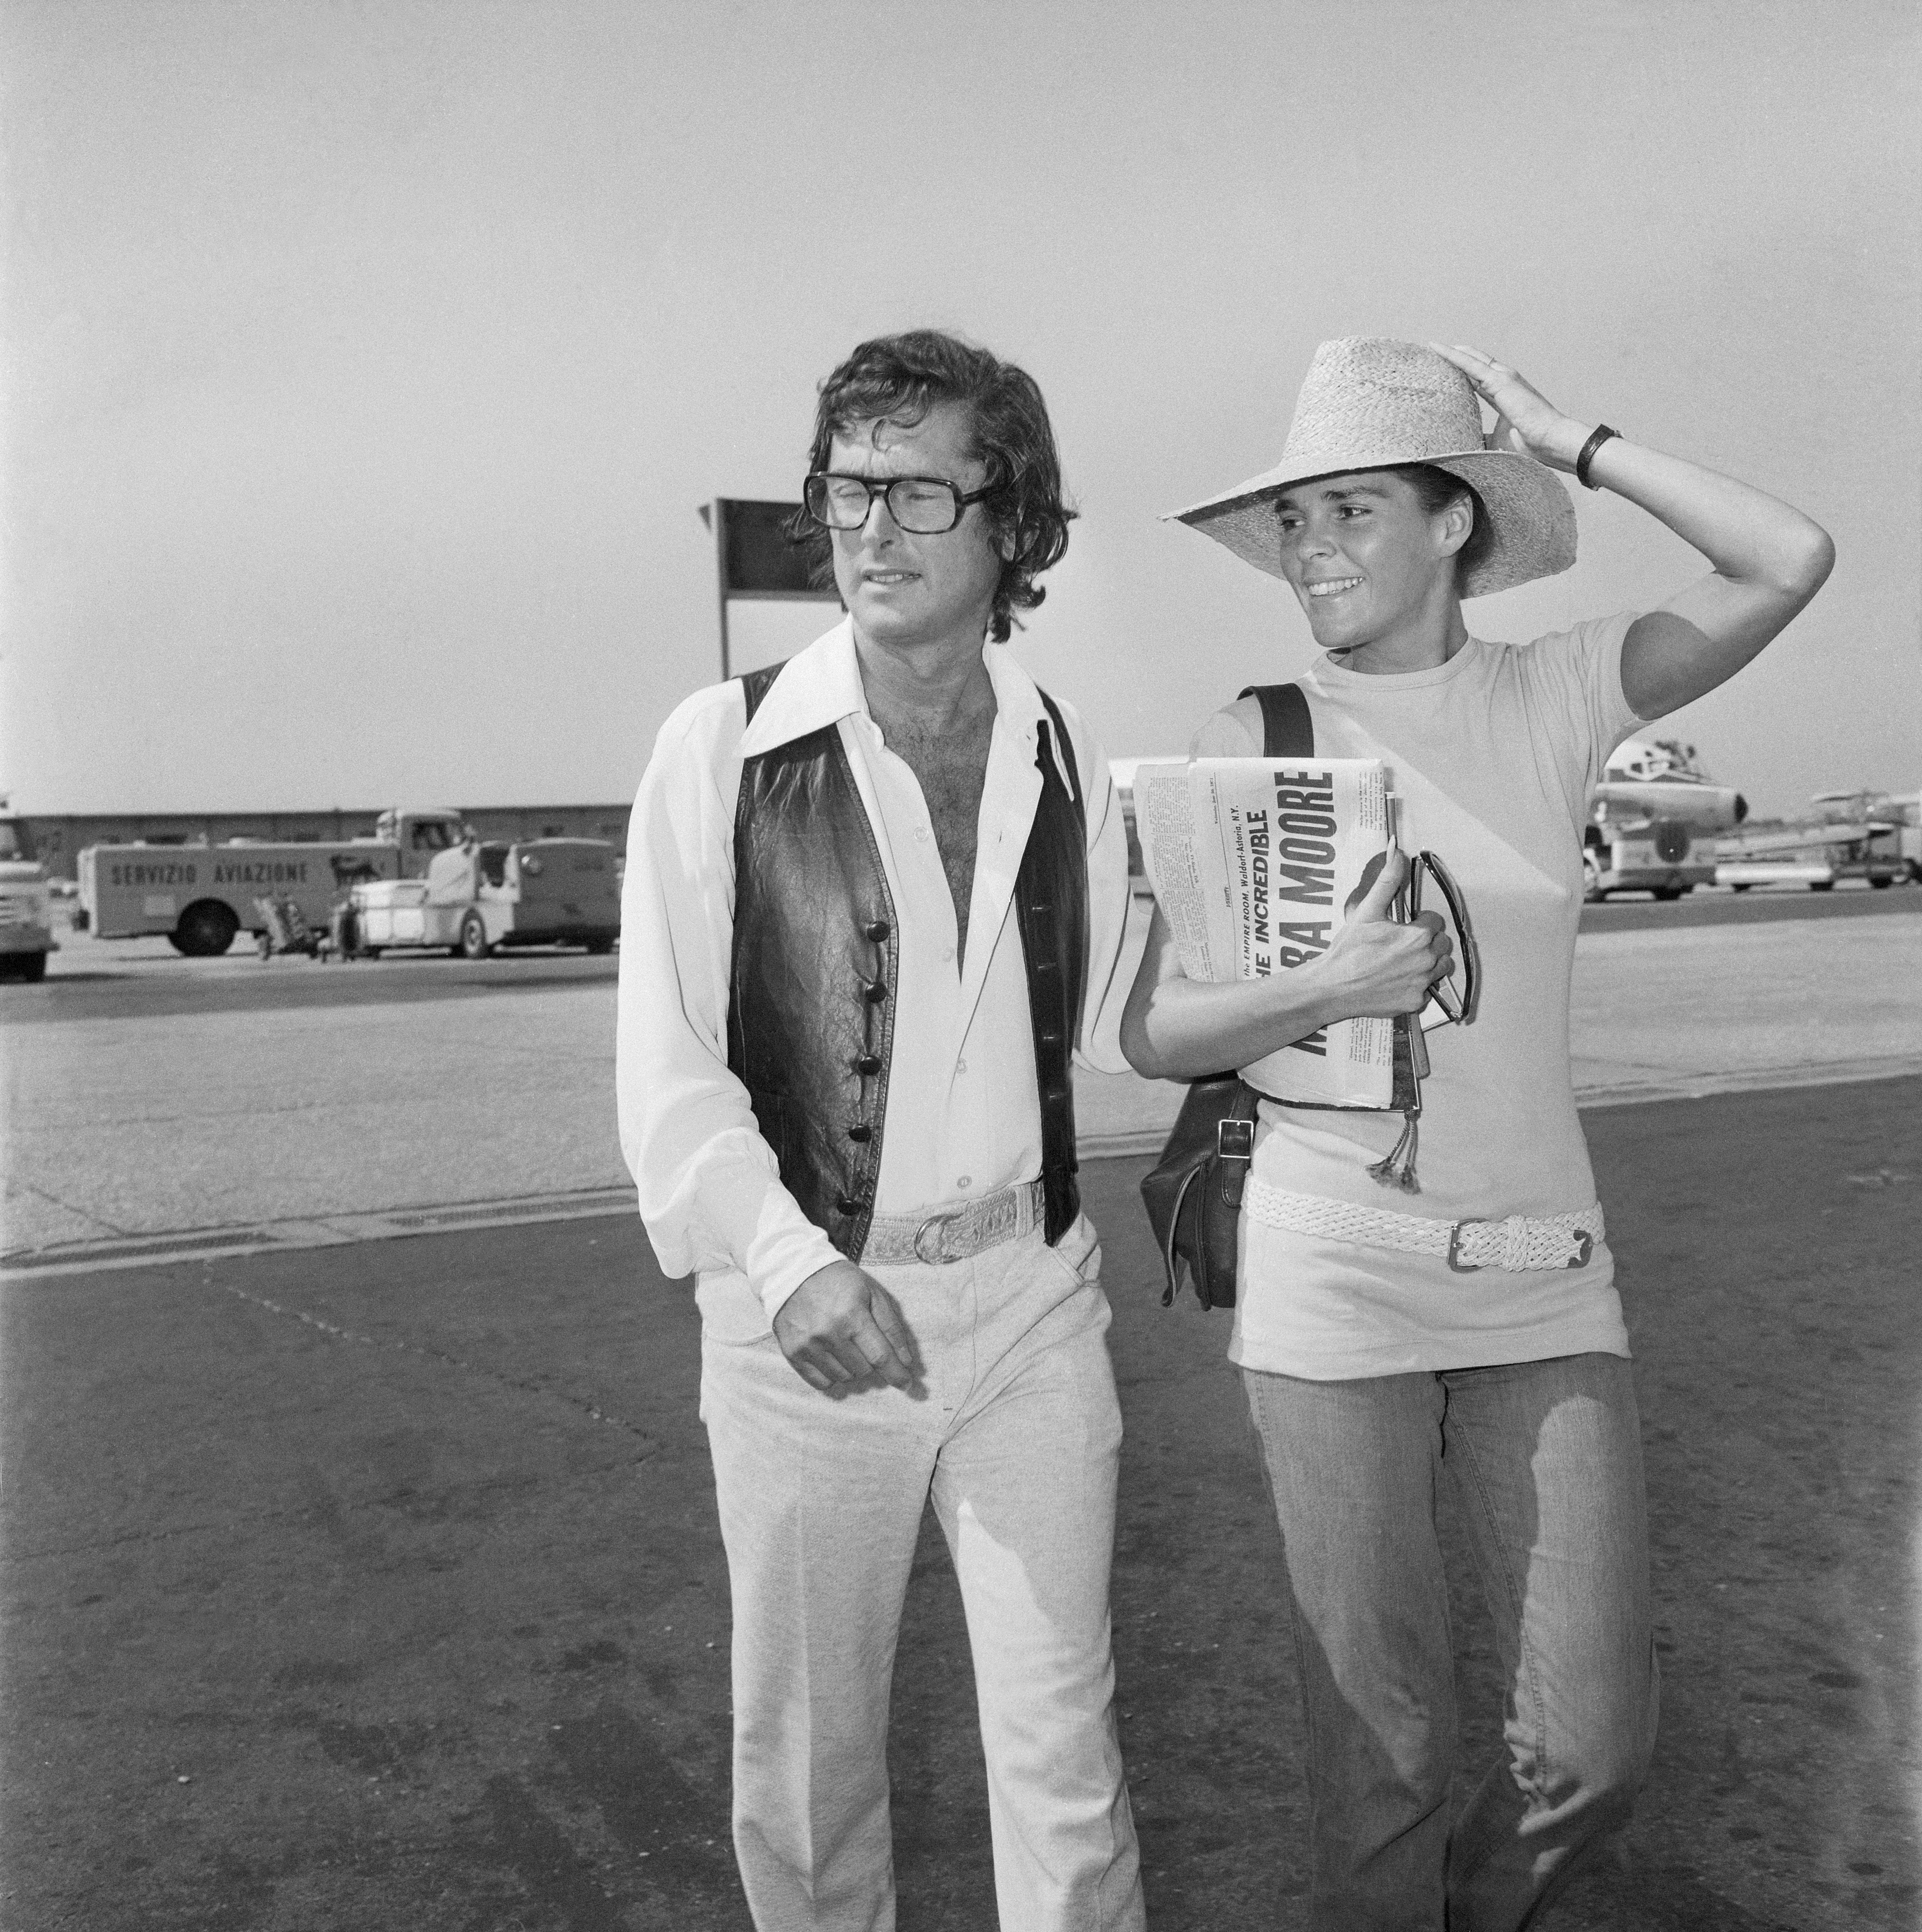 Robert Evans and Ali MacGraw arriving at an airport in Rome, 1971 | Source: Getty Images